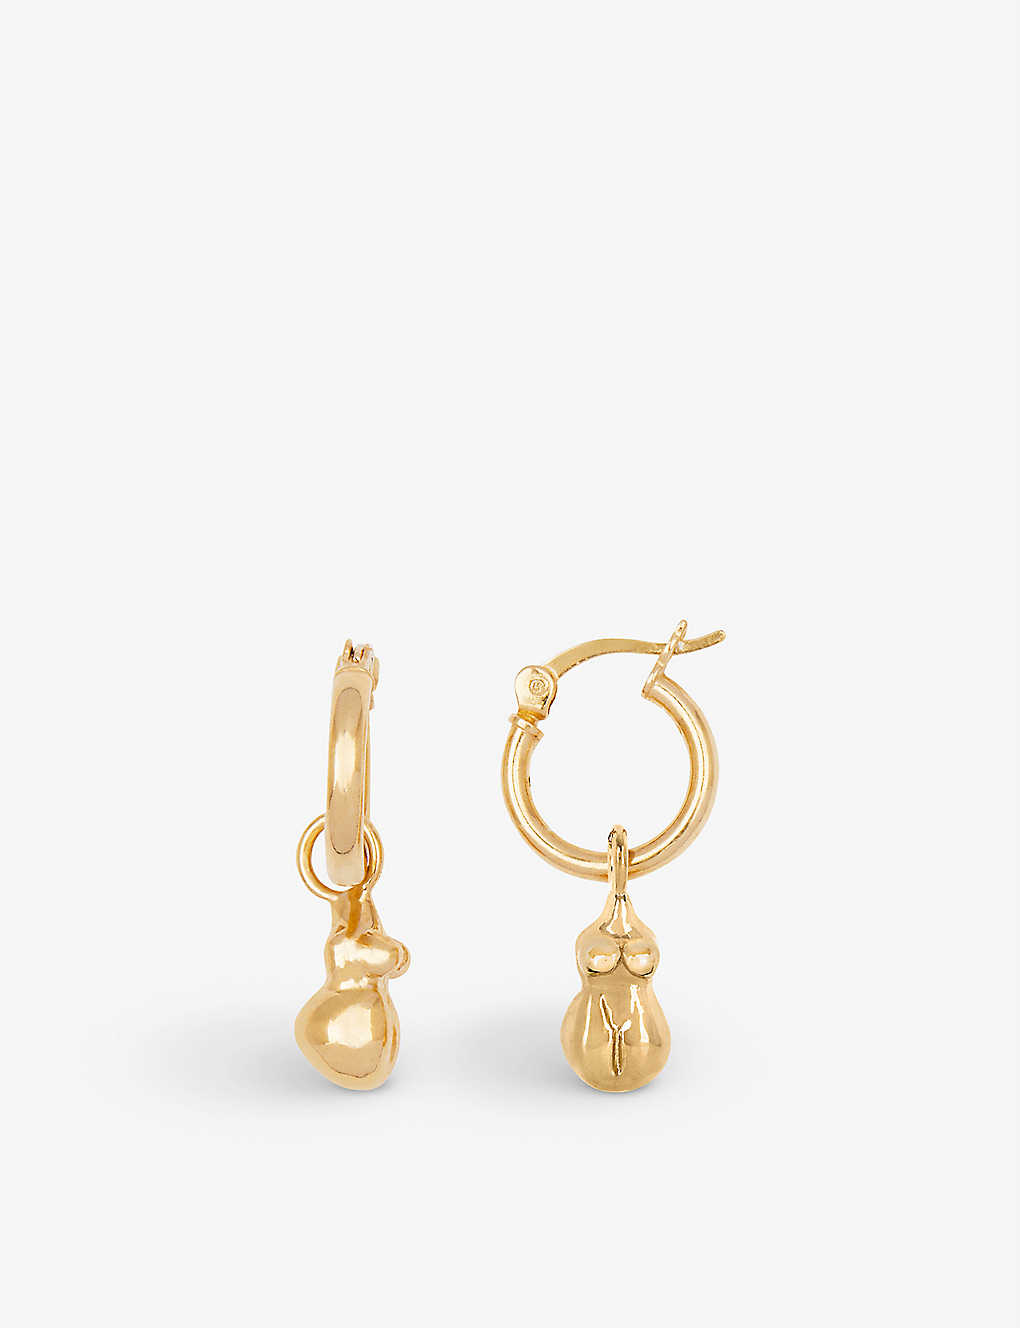 La Maison Couture Deborah Blyth Wobbly Bits 18ct Yellow Gold-plated Recycled Brass Hoop Earrings